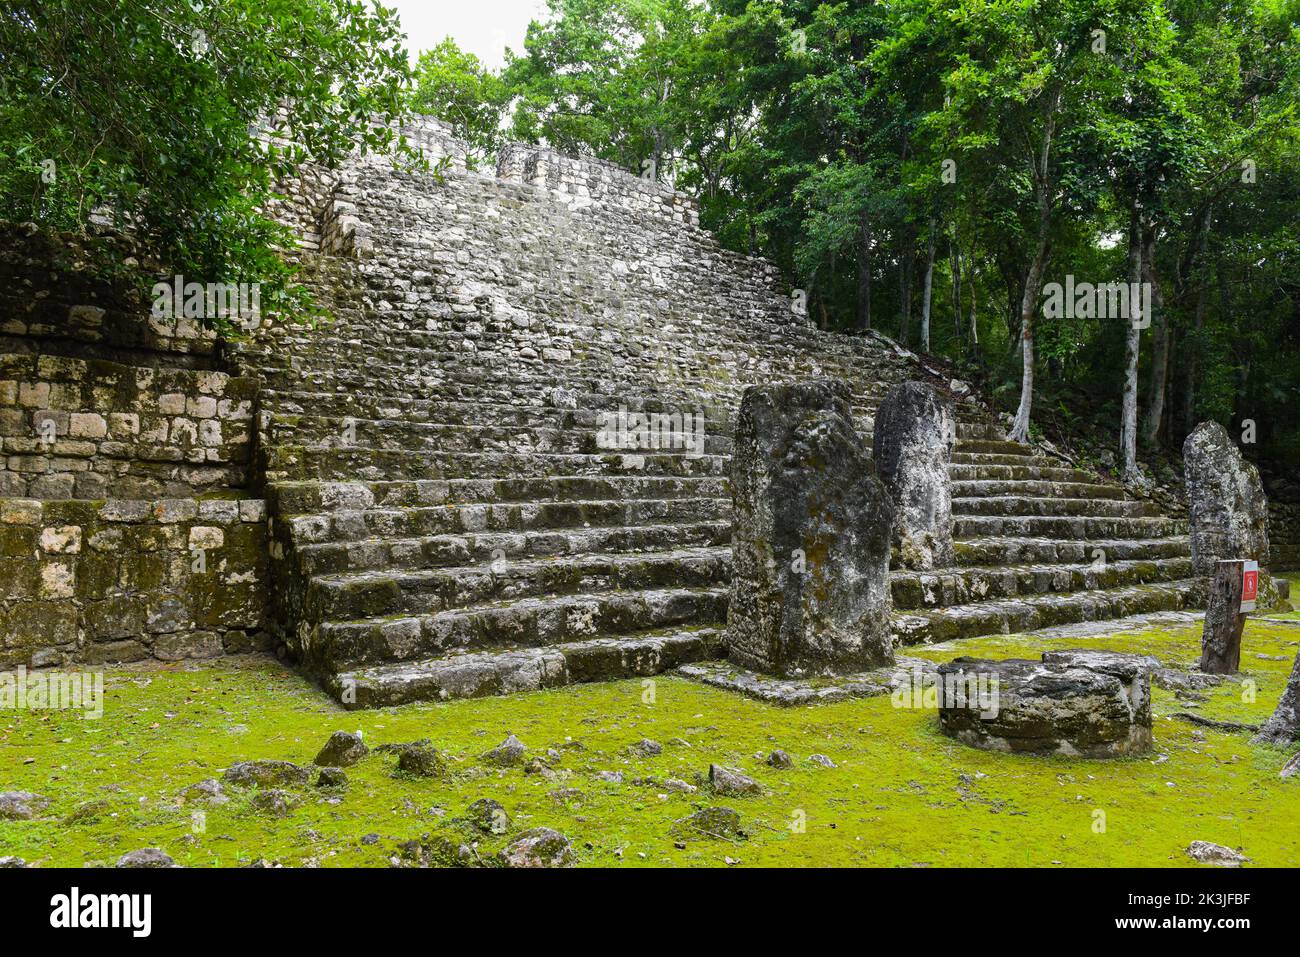 Calakmul, Mayan archaeological site, Campeche state, Mexico Stock Photo